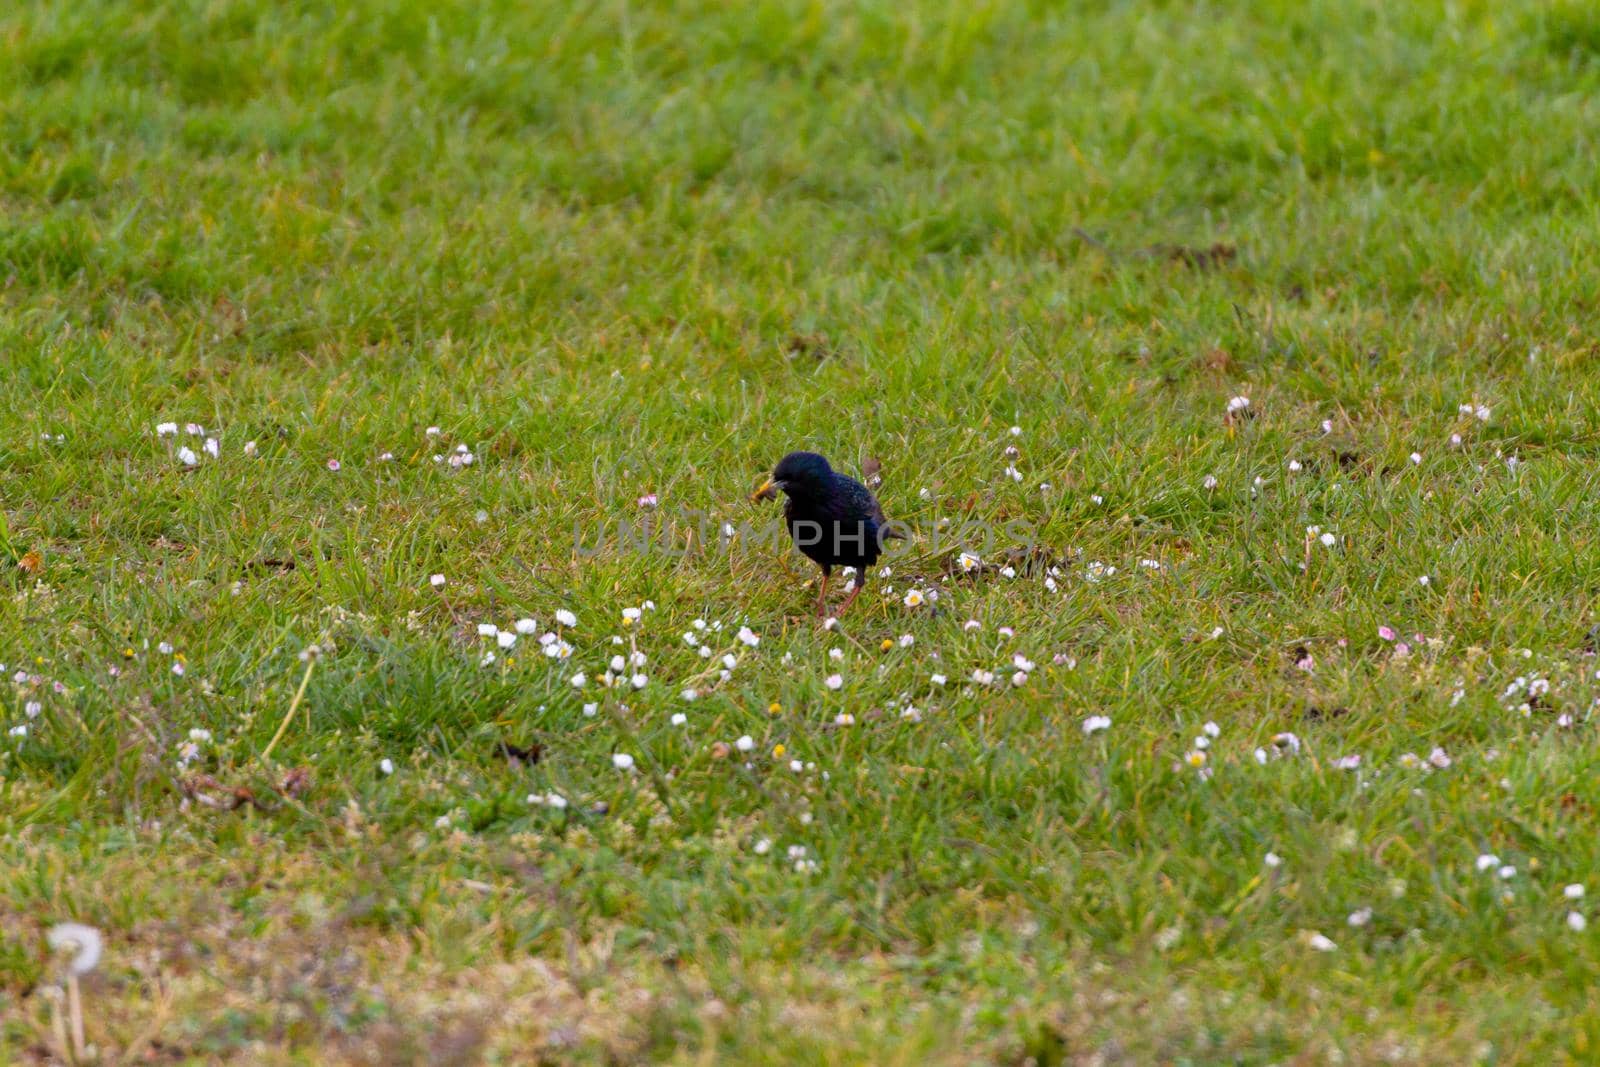 A Small Black Bird In a Lawn by AlbertoPascual